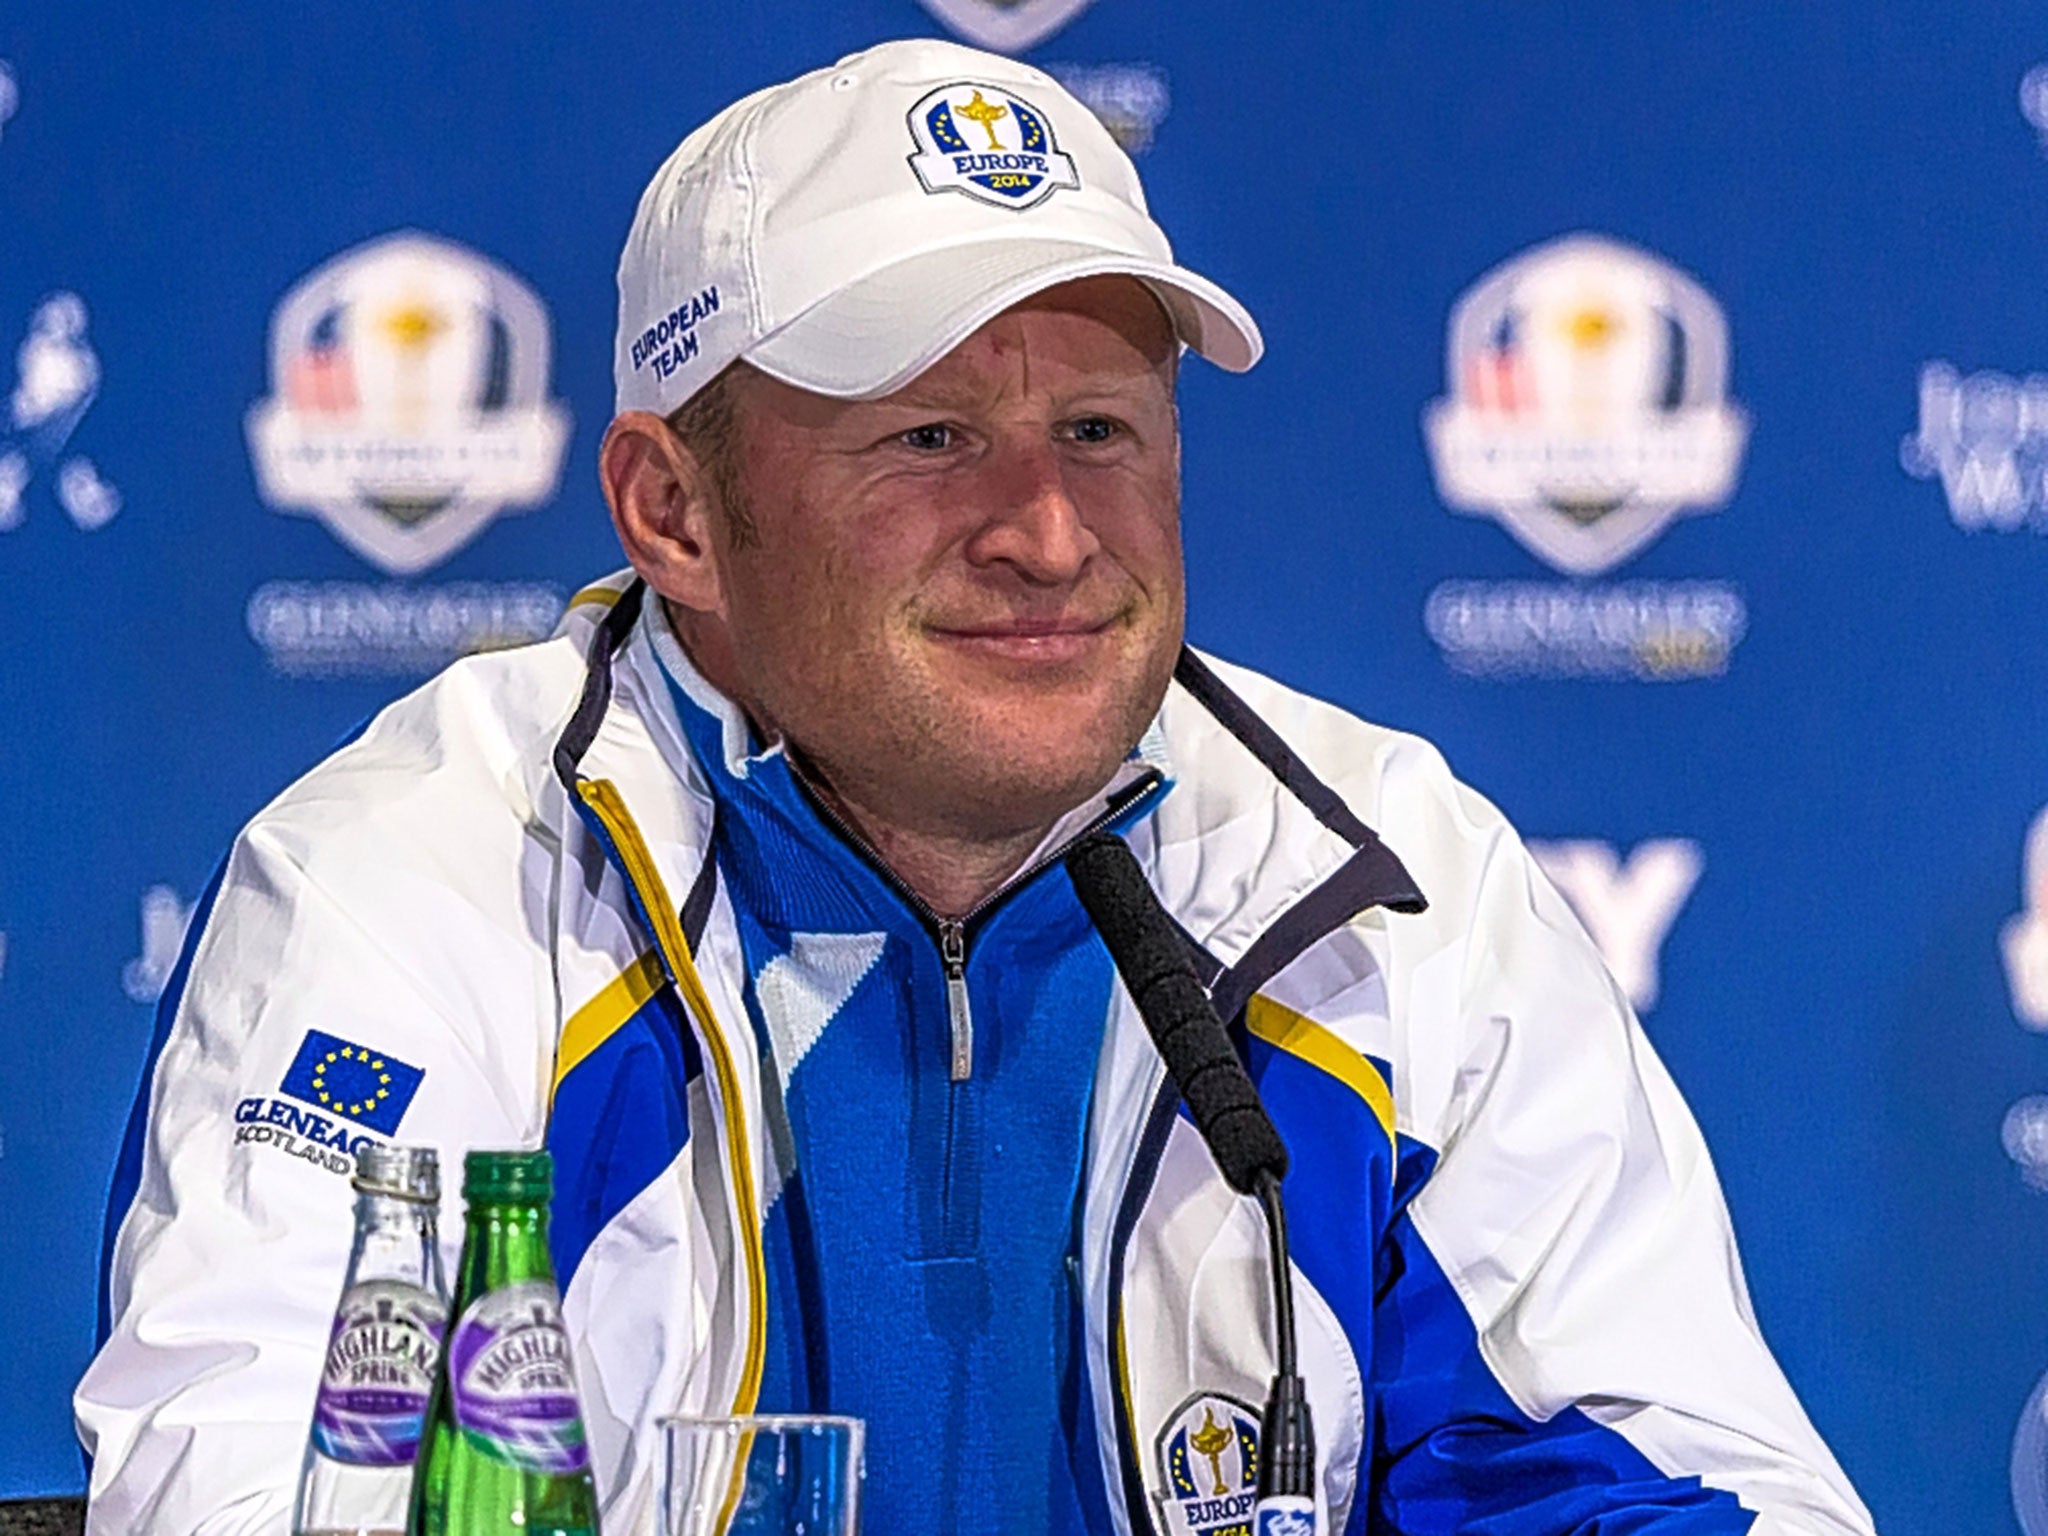 Welsh rookie Jamie Donaldson enjoyed the perfect start in the Ryder Cup on Friday